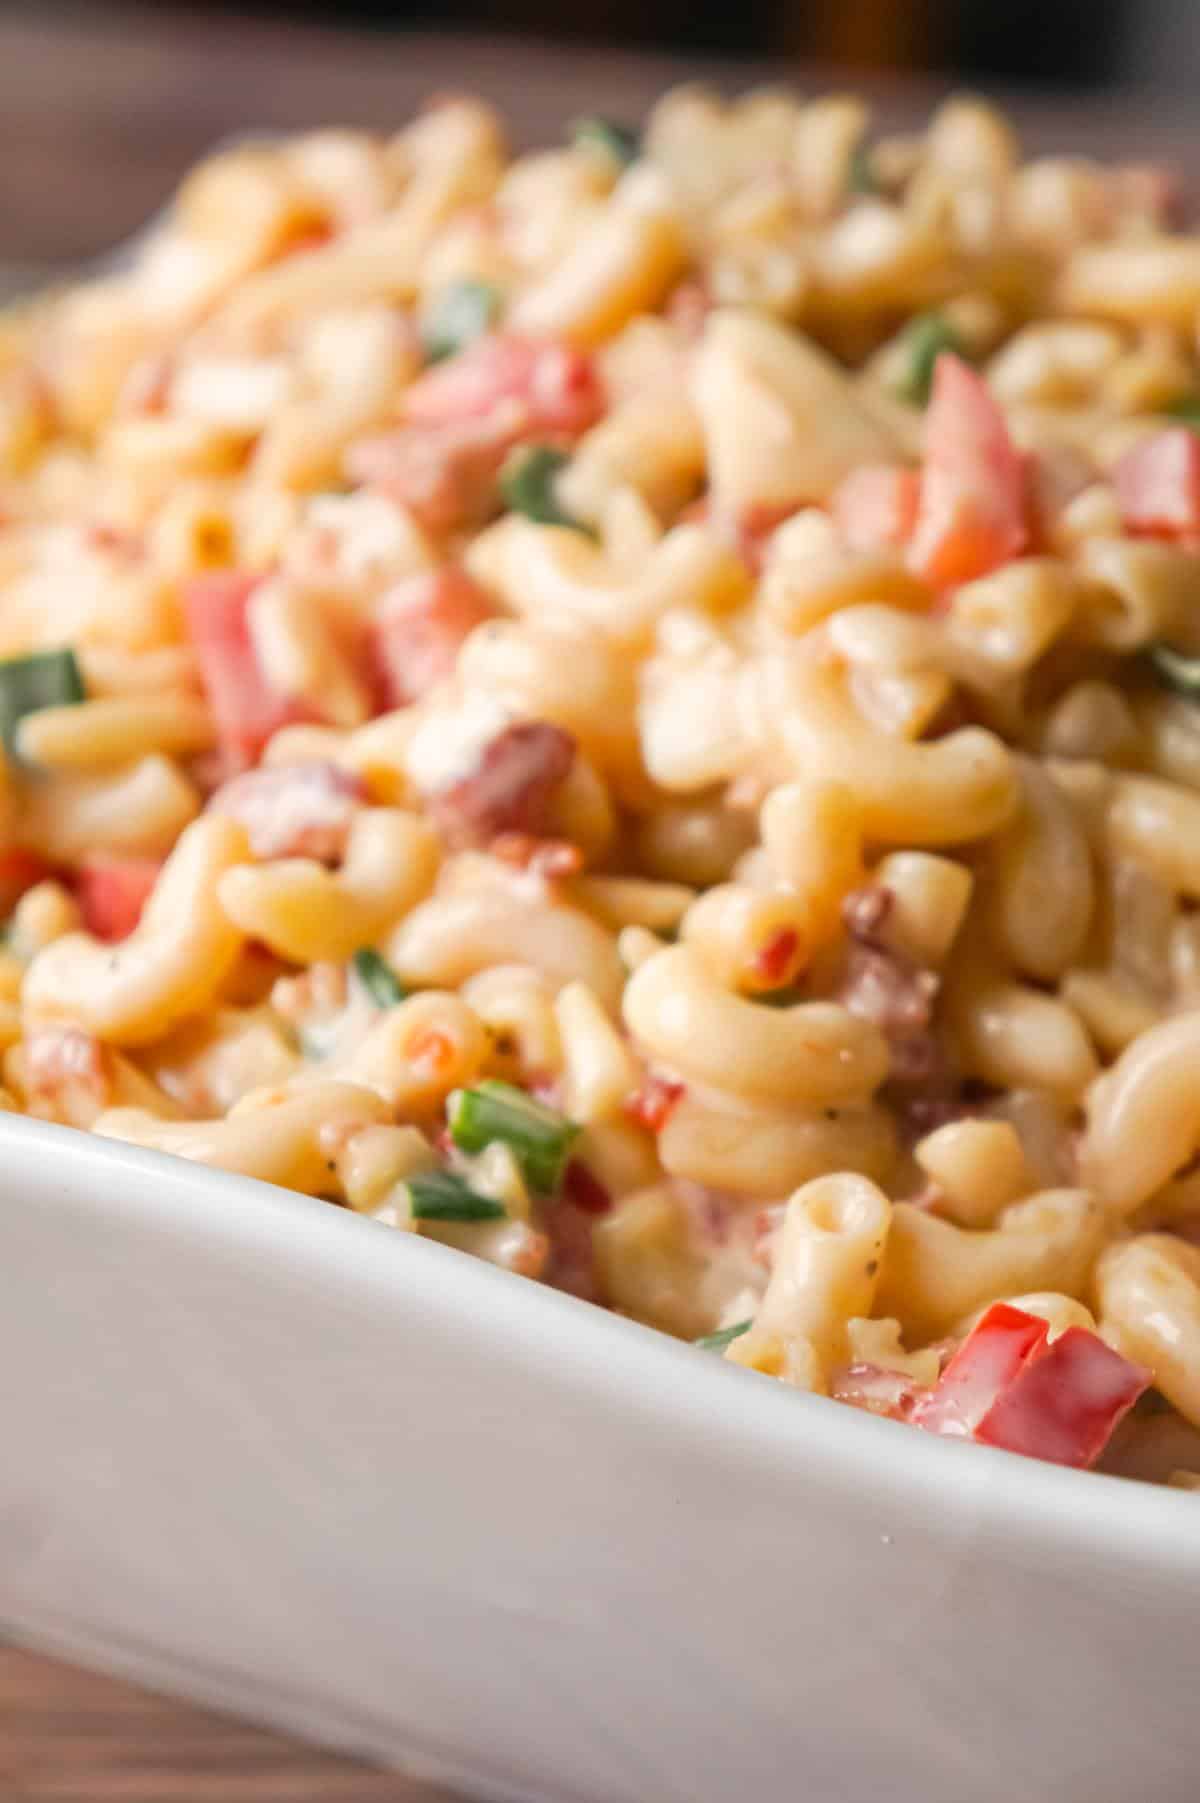 Sweet Chili Bacon Pasta Salad is an easy macaroni salad recipe loaded with bacon, chopped green onions, diced red peppers and slivered almonds all tossed in mayo and Thai sweet chili sauce.